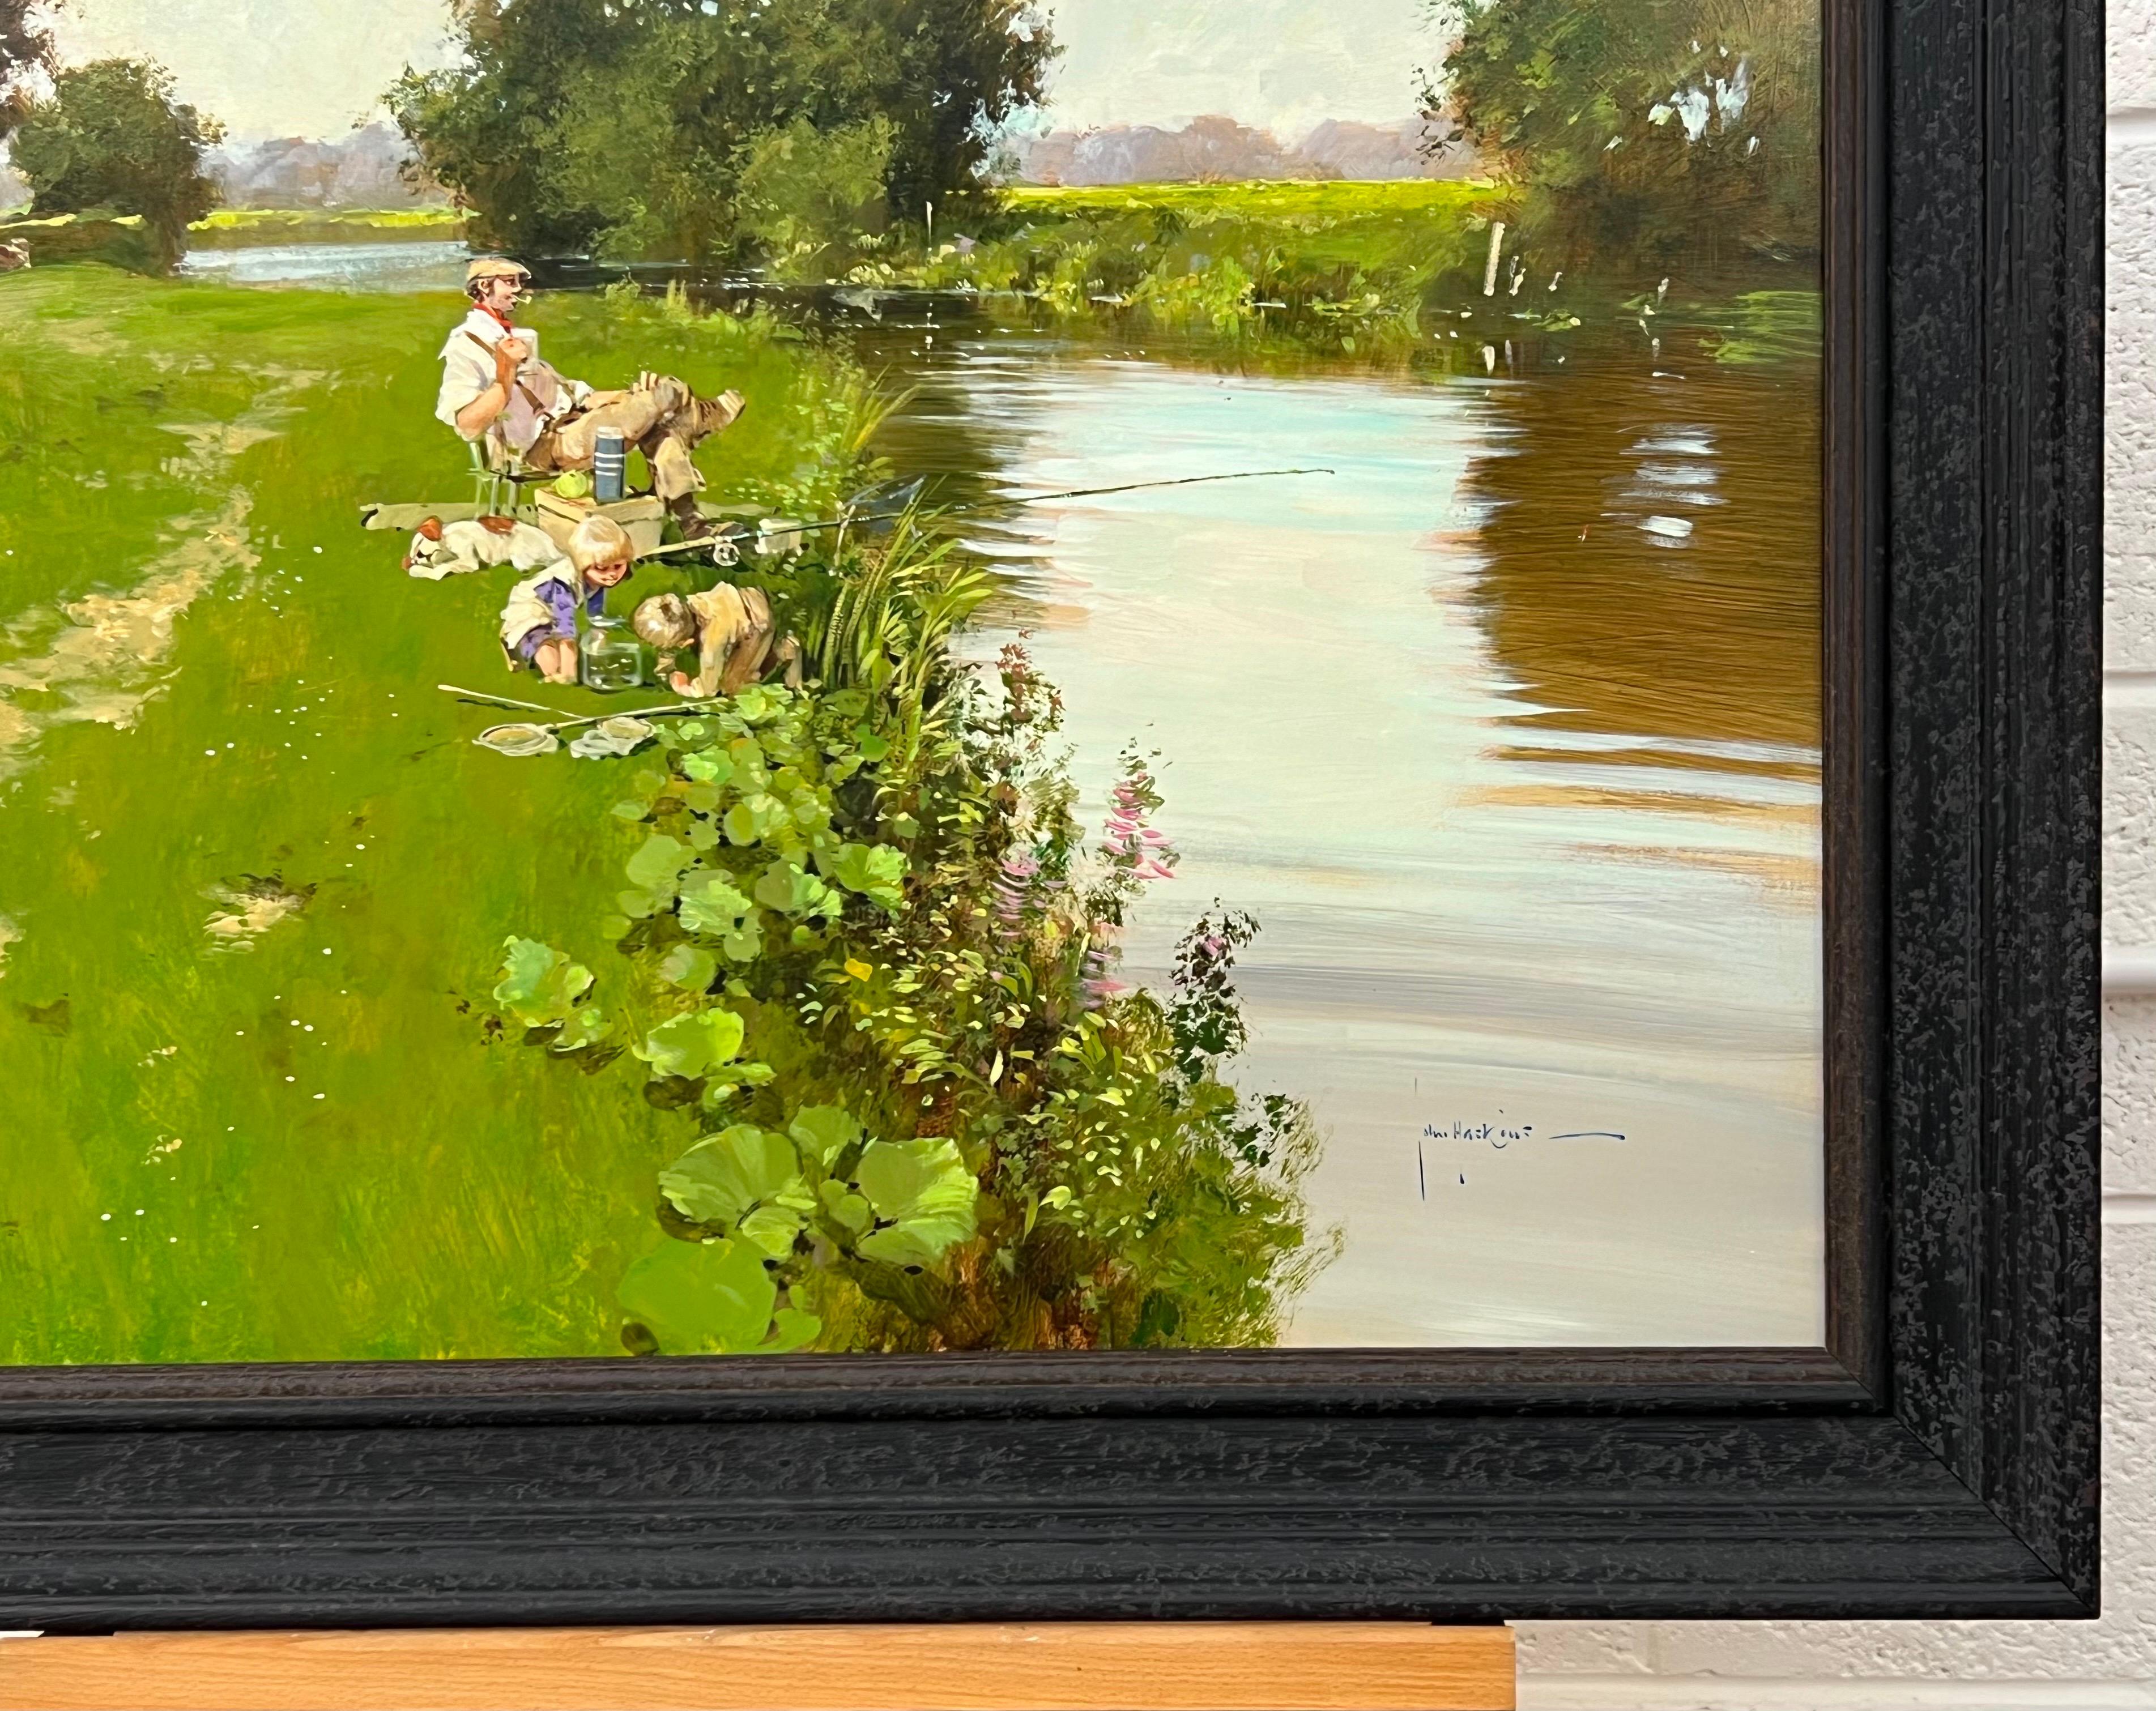 Man Fishing with Children Playing at a River Side in the English Countryside For Sale 9